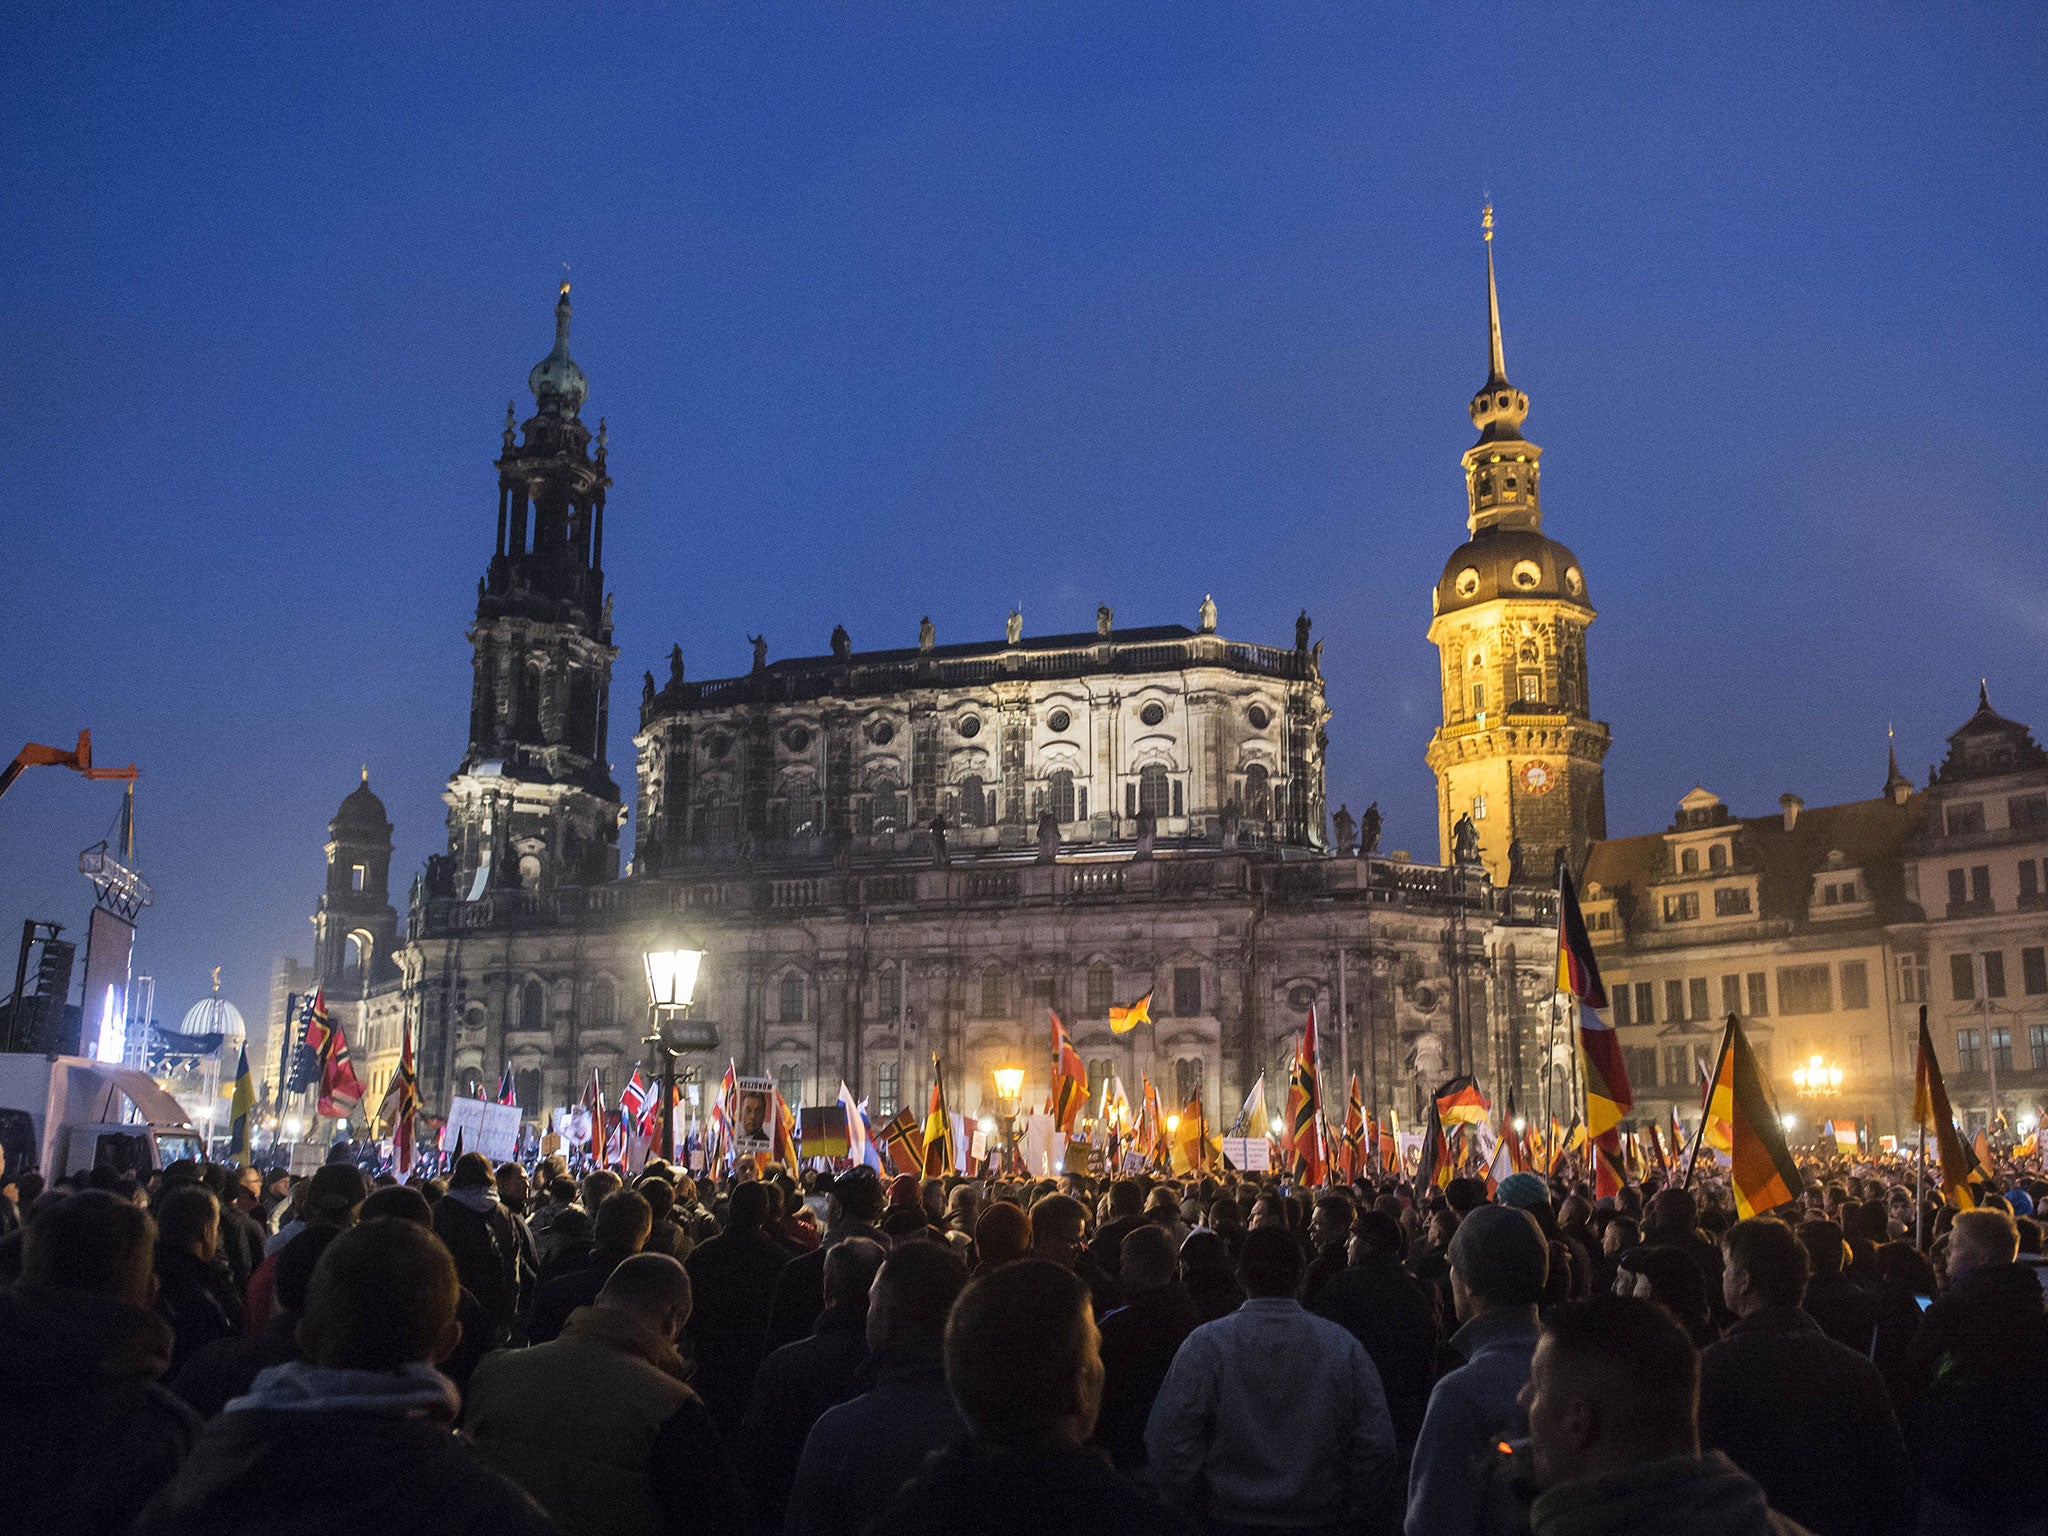 Estimates of the people attending the Pegida rally ranged up to 40,000